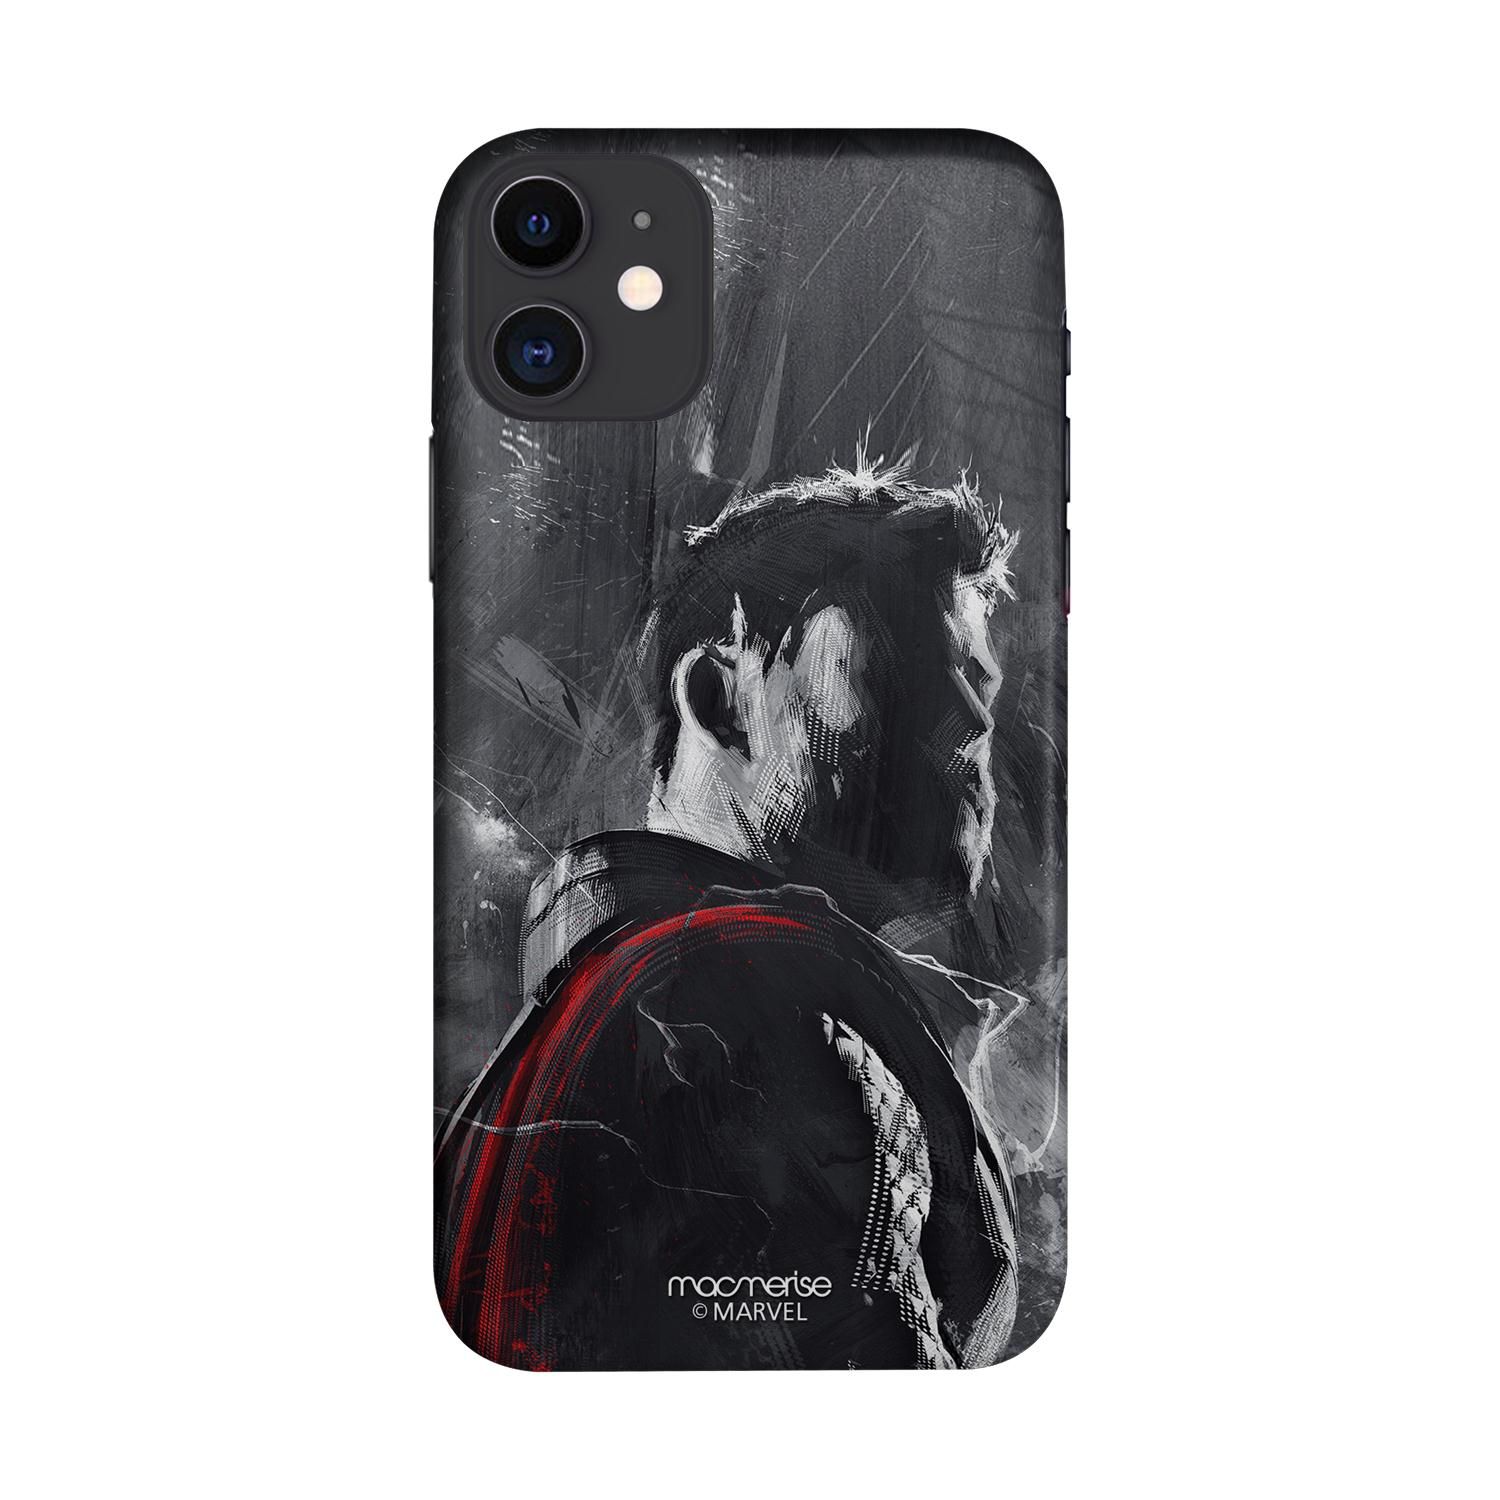 Buy Charcoal Art Thor - Sleek Phone Case for iPhone 11 Online